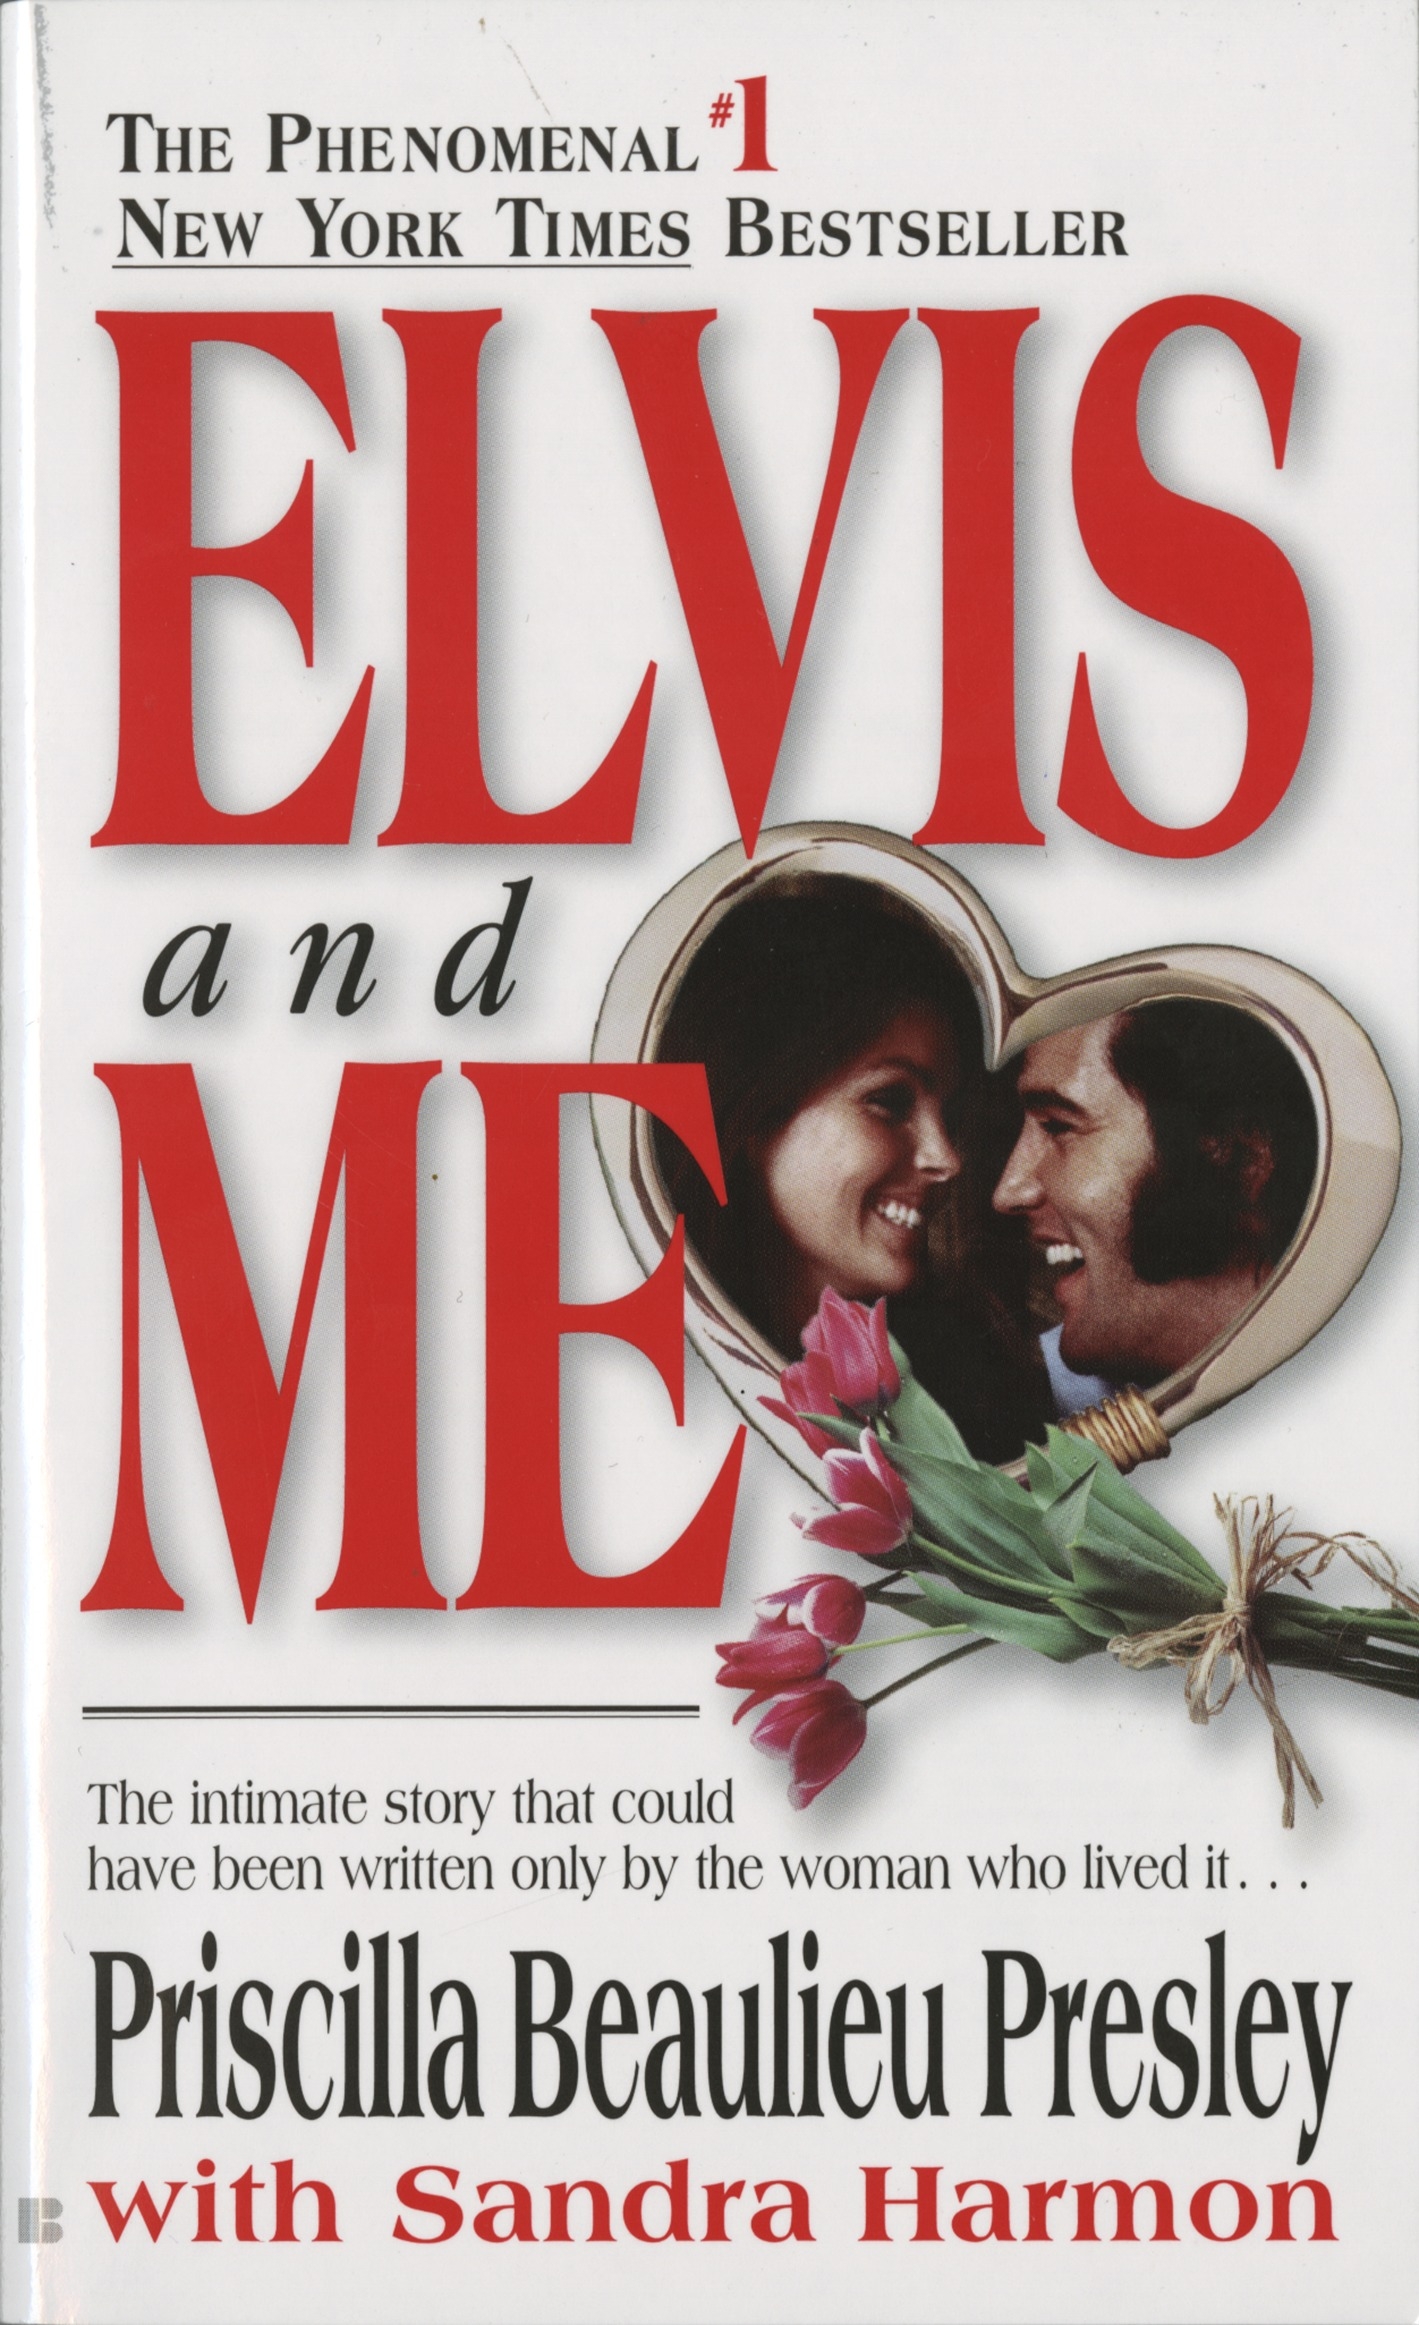 The cover of the book Elvis and Me, featuring a photo of Priscilla and Elvis Presley